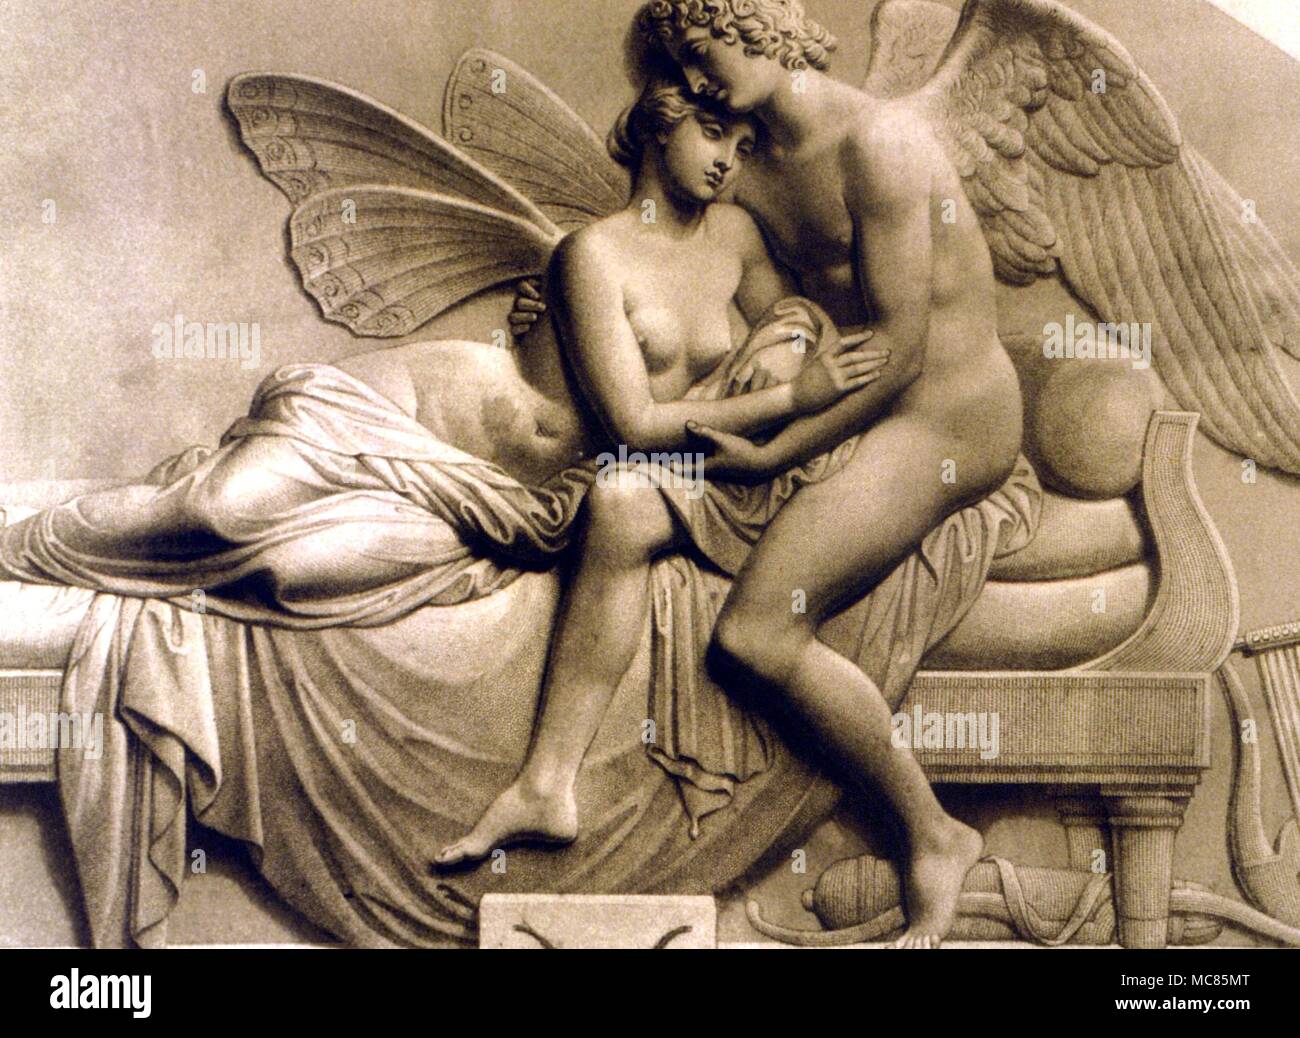 GREEK MYTHOLOGY Cupid and Psyche Engraving by Roffe after the bas relief sculpture by J Gibson of 'Cupid and Psyche', formerly in the collection of Queen Victoria Stock Photo